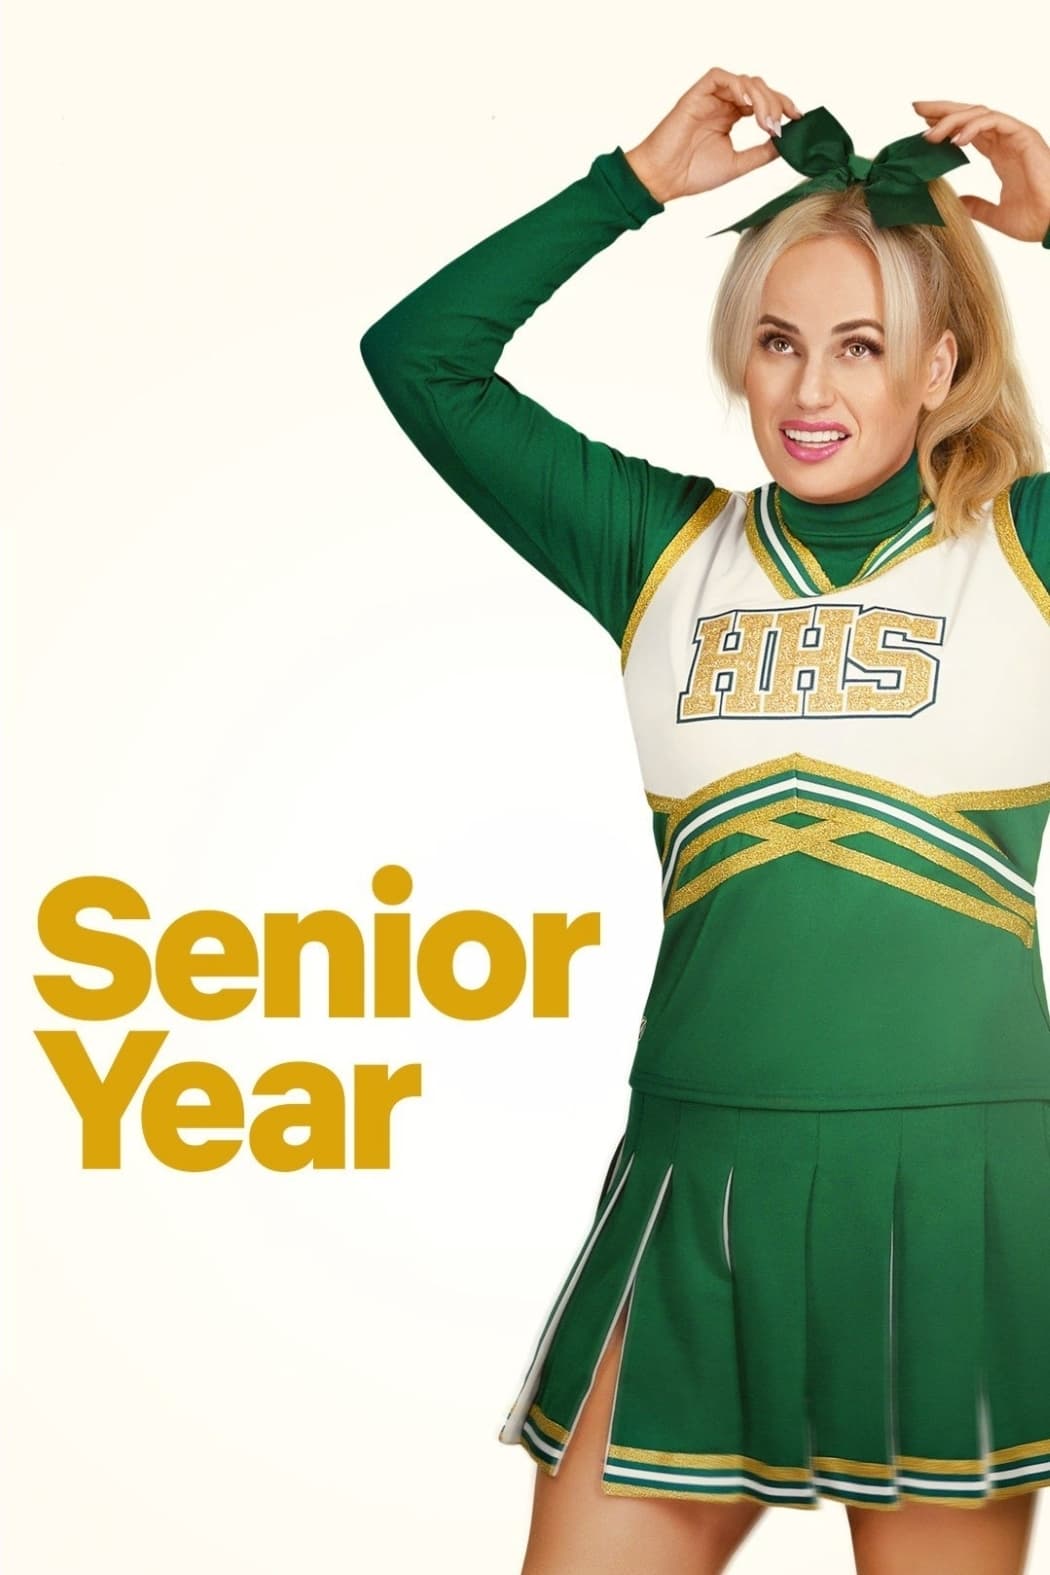 Poster for the movie "Senior Year"